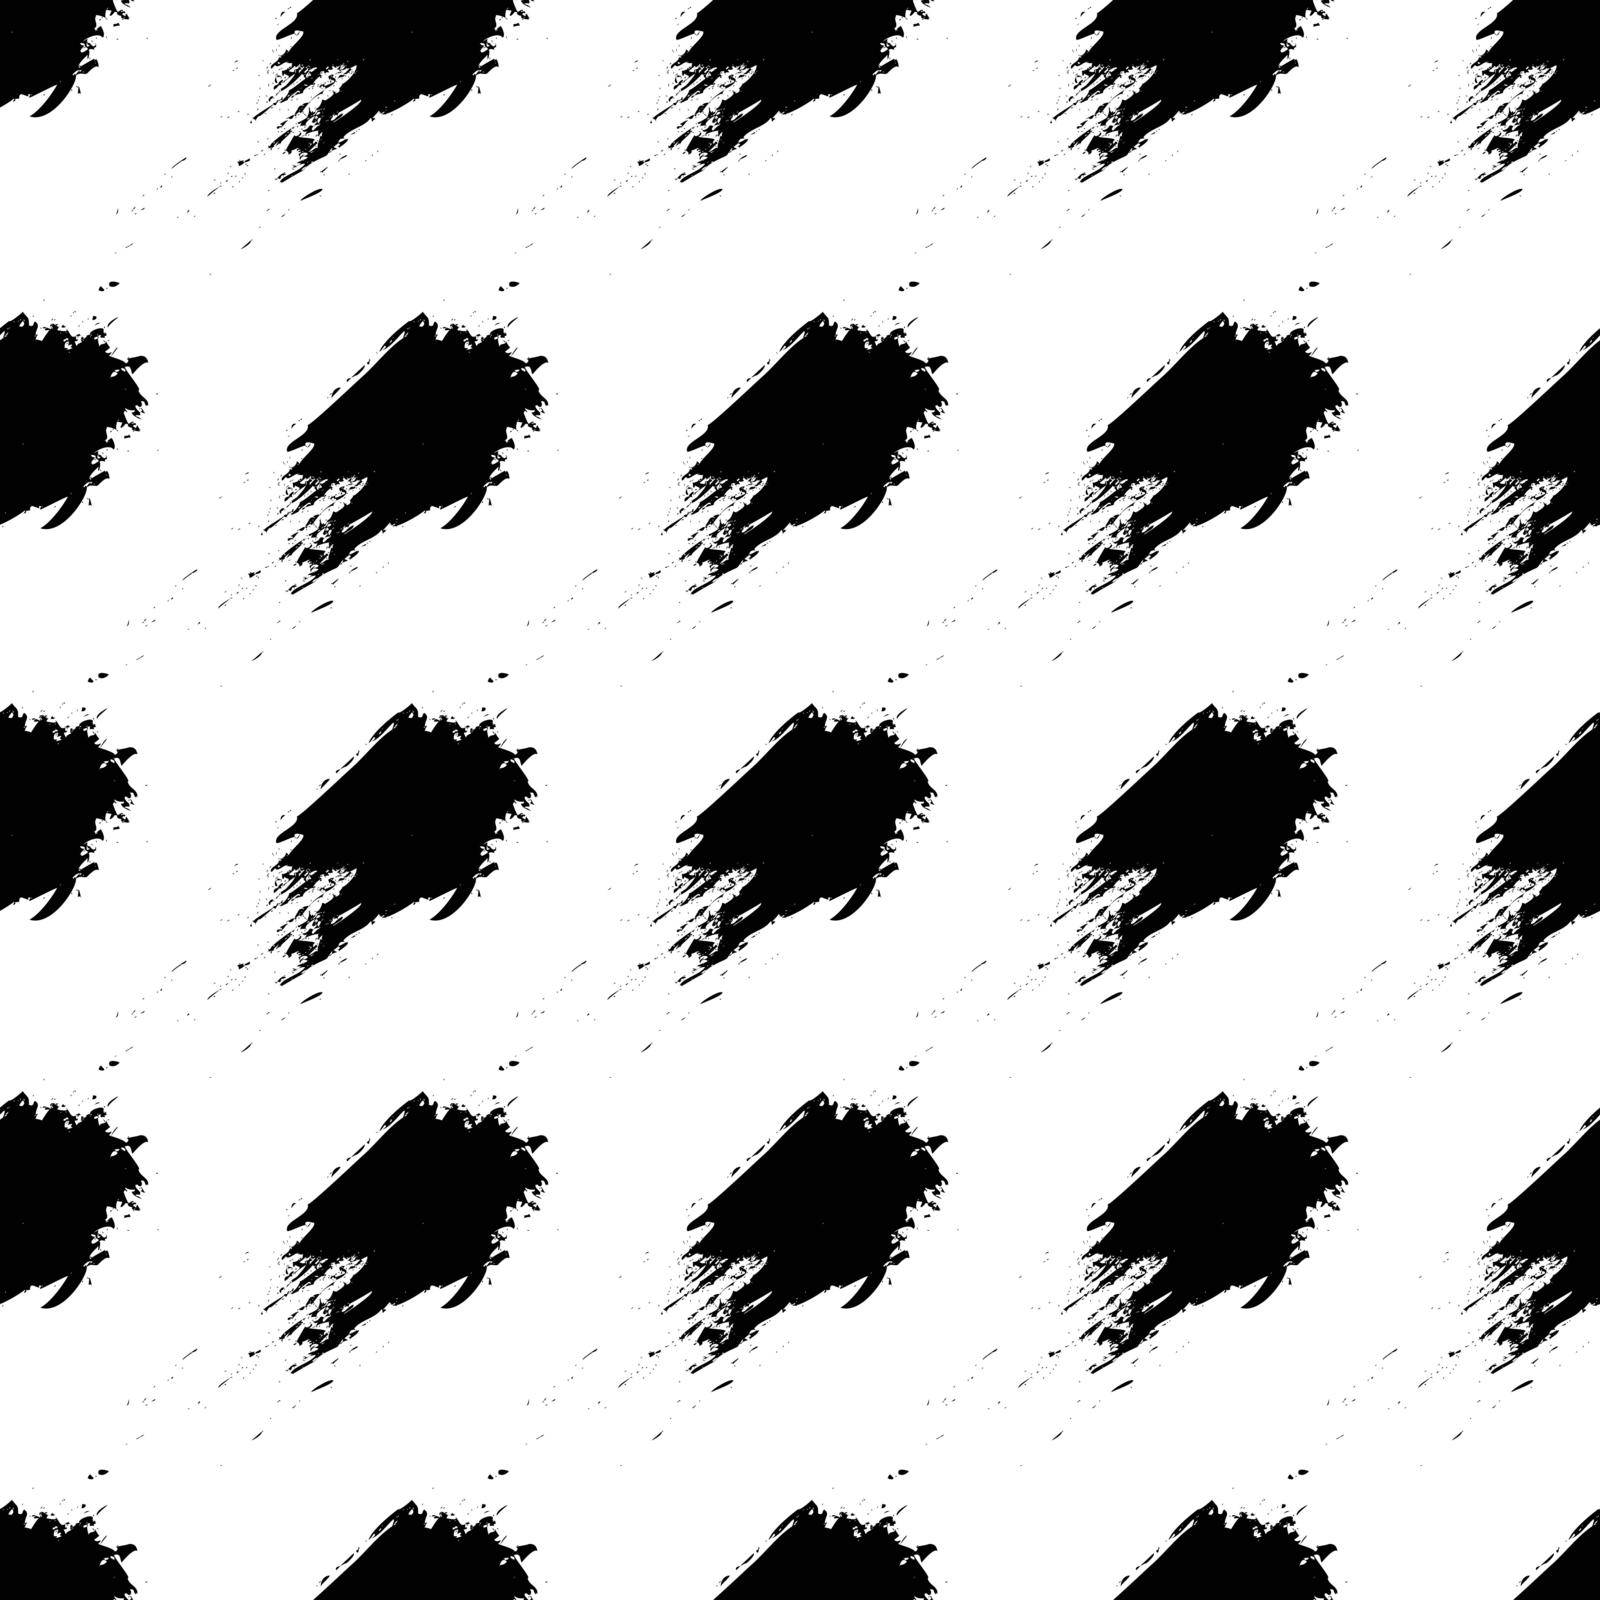 black and white hand drawn simple ink brush stroke seamless pattern. vector illustration for background, bed linen fabric, wrapping paper, scrapbooking by MariaTem